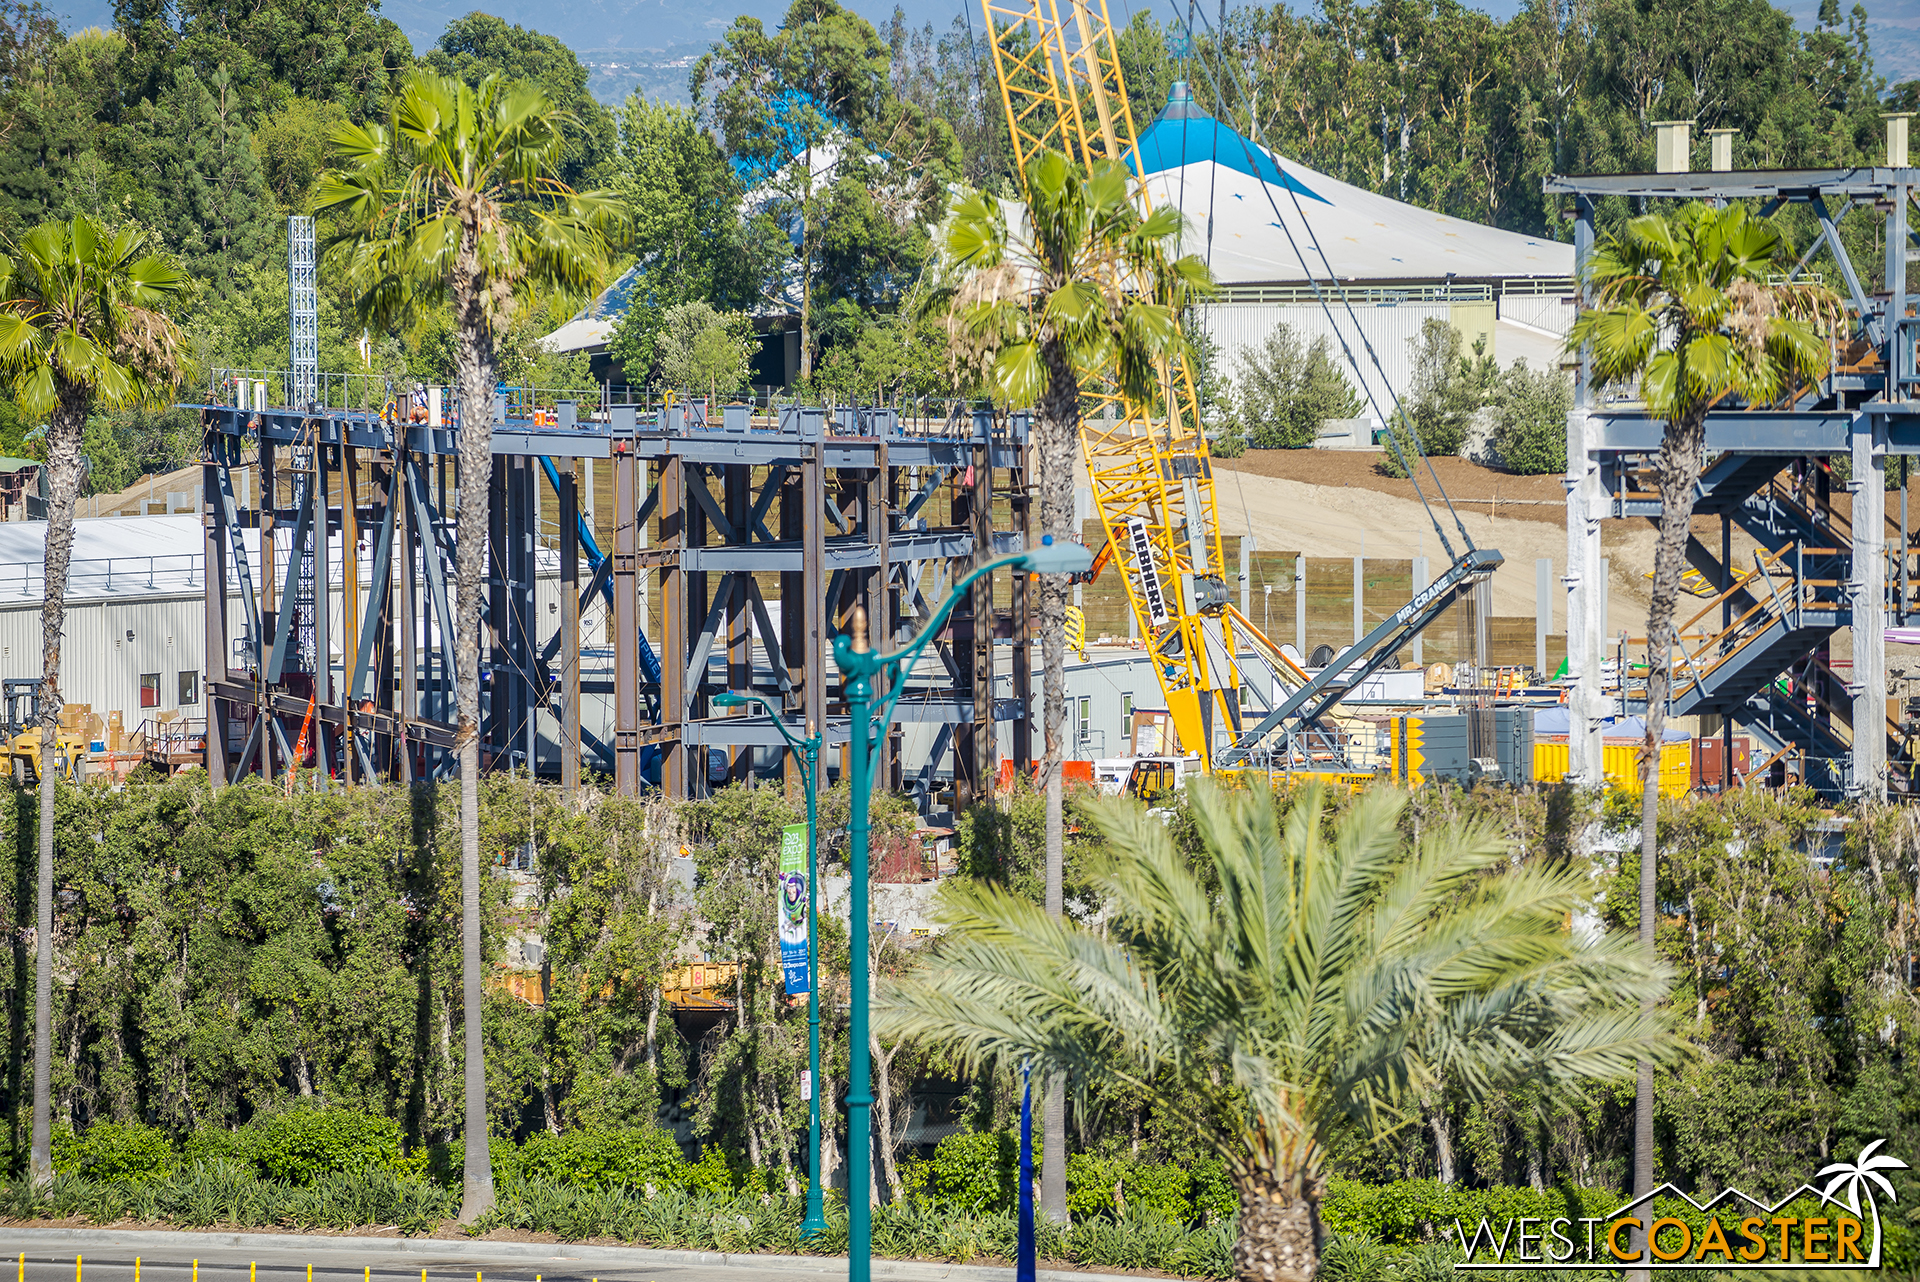  The framing for the Millennium Eagle ride that we saw last week has also expanded. 